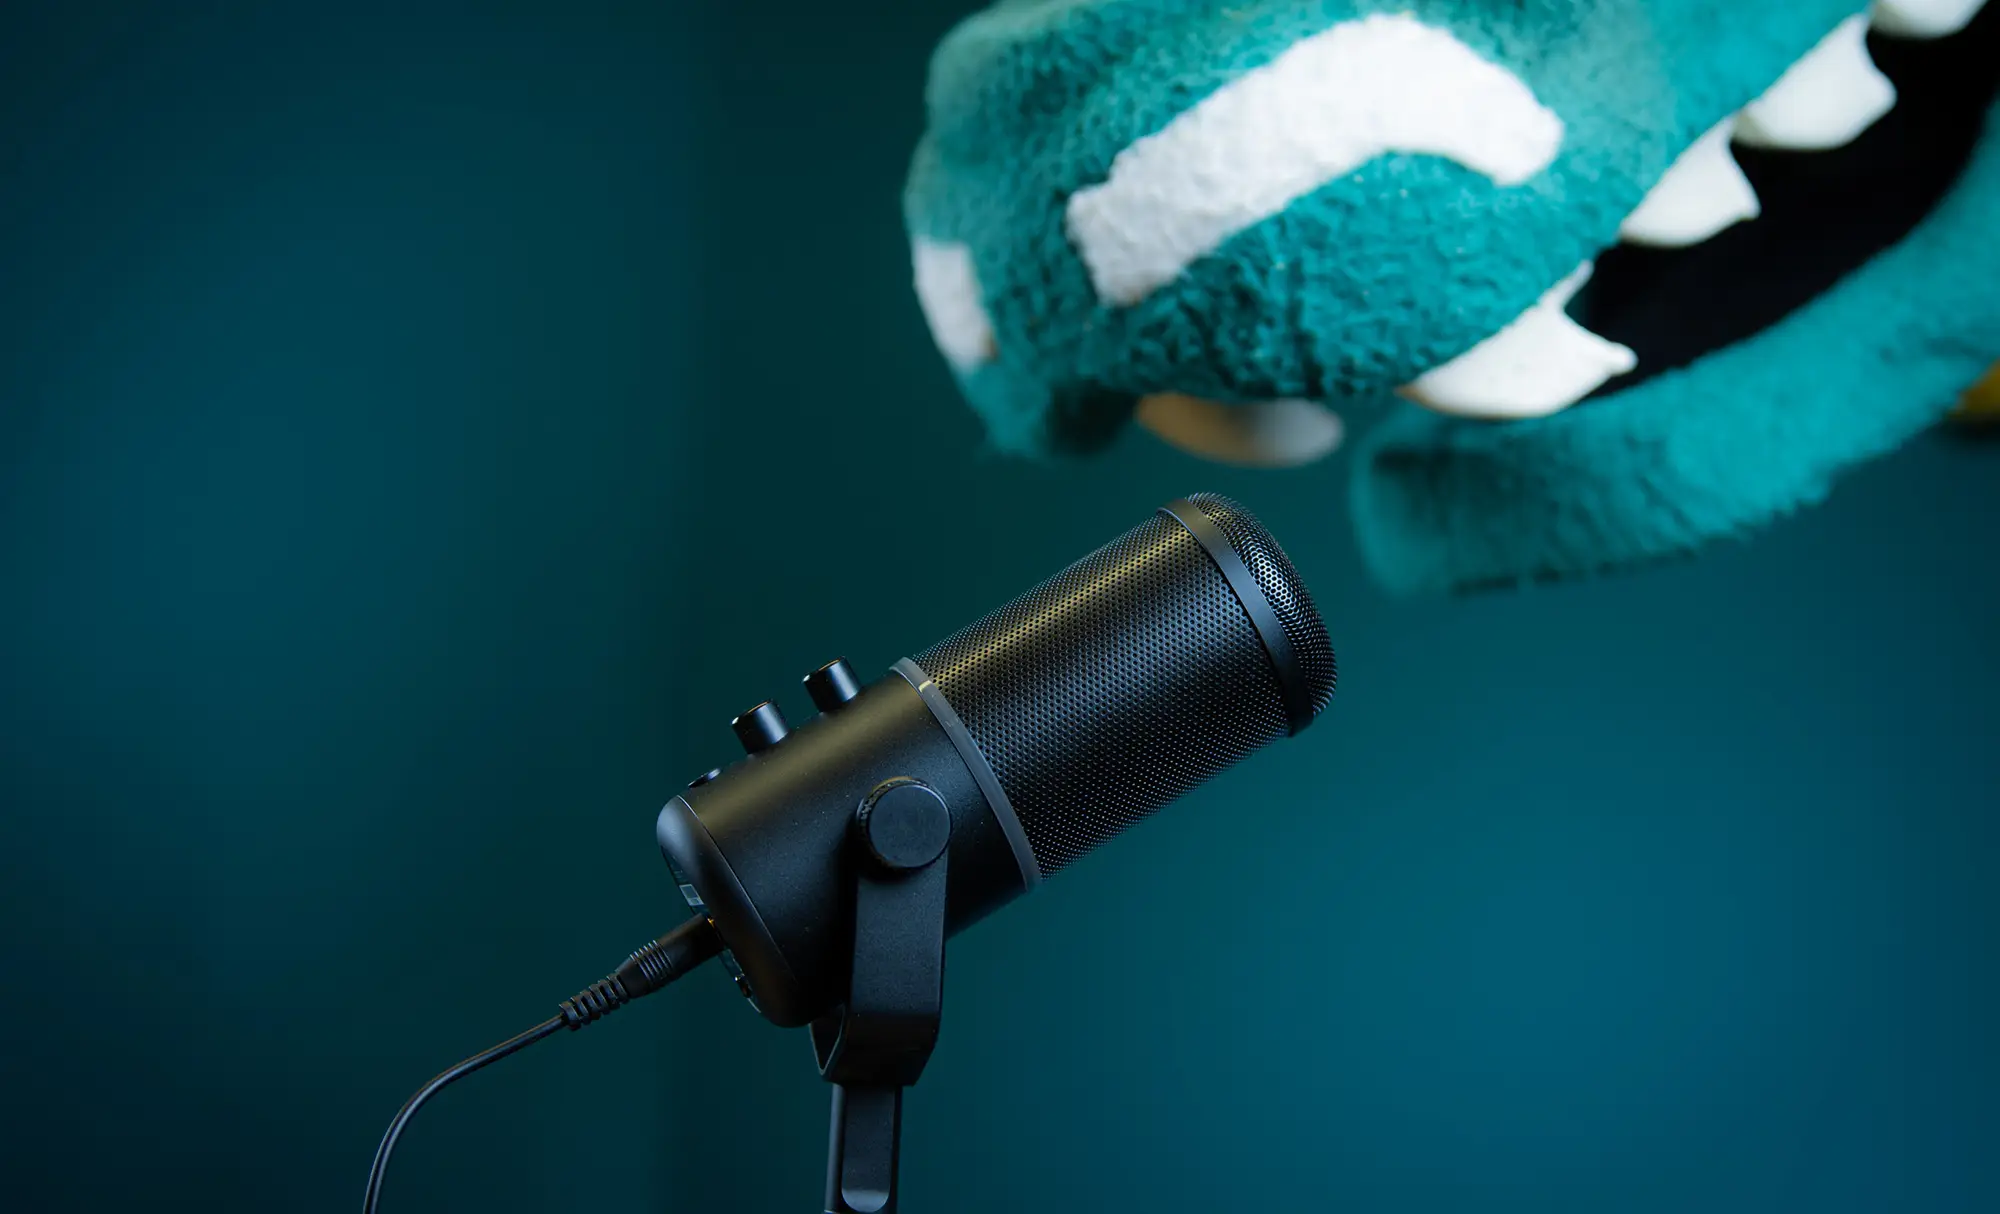 Microphone with teal background and snout of Seawolf mascot leaning in looking as if to speak